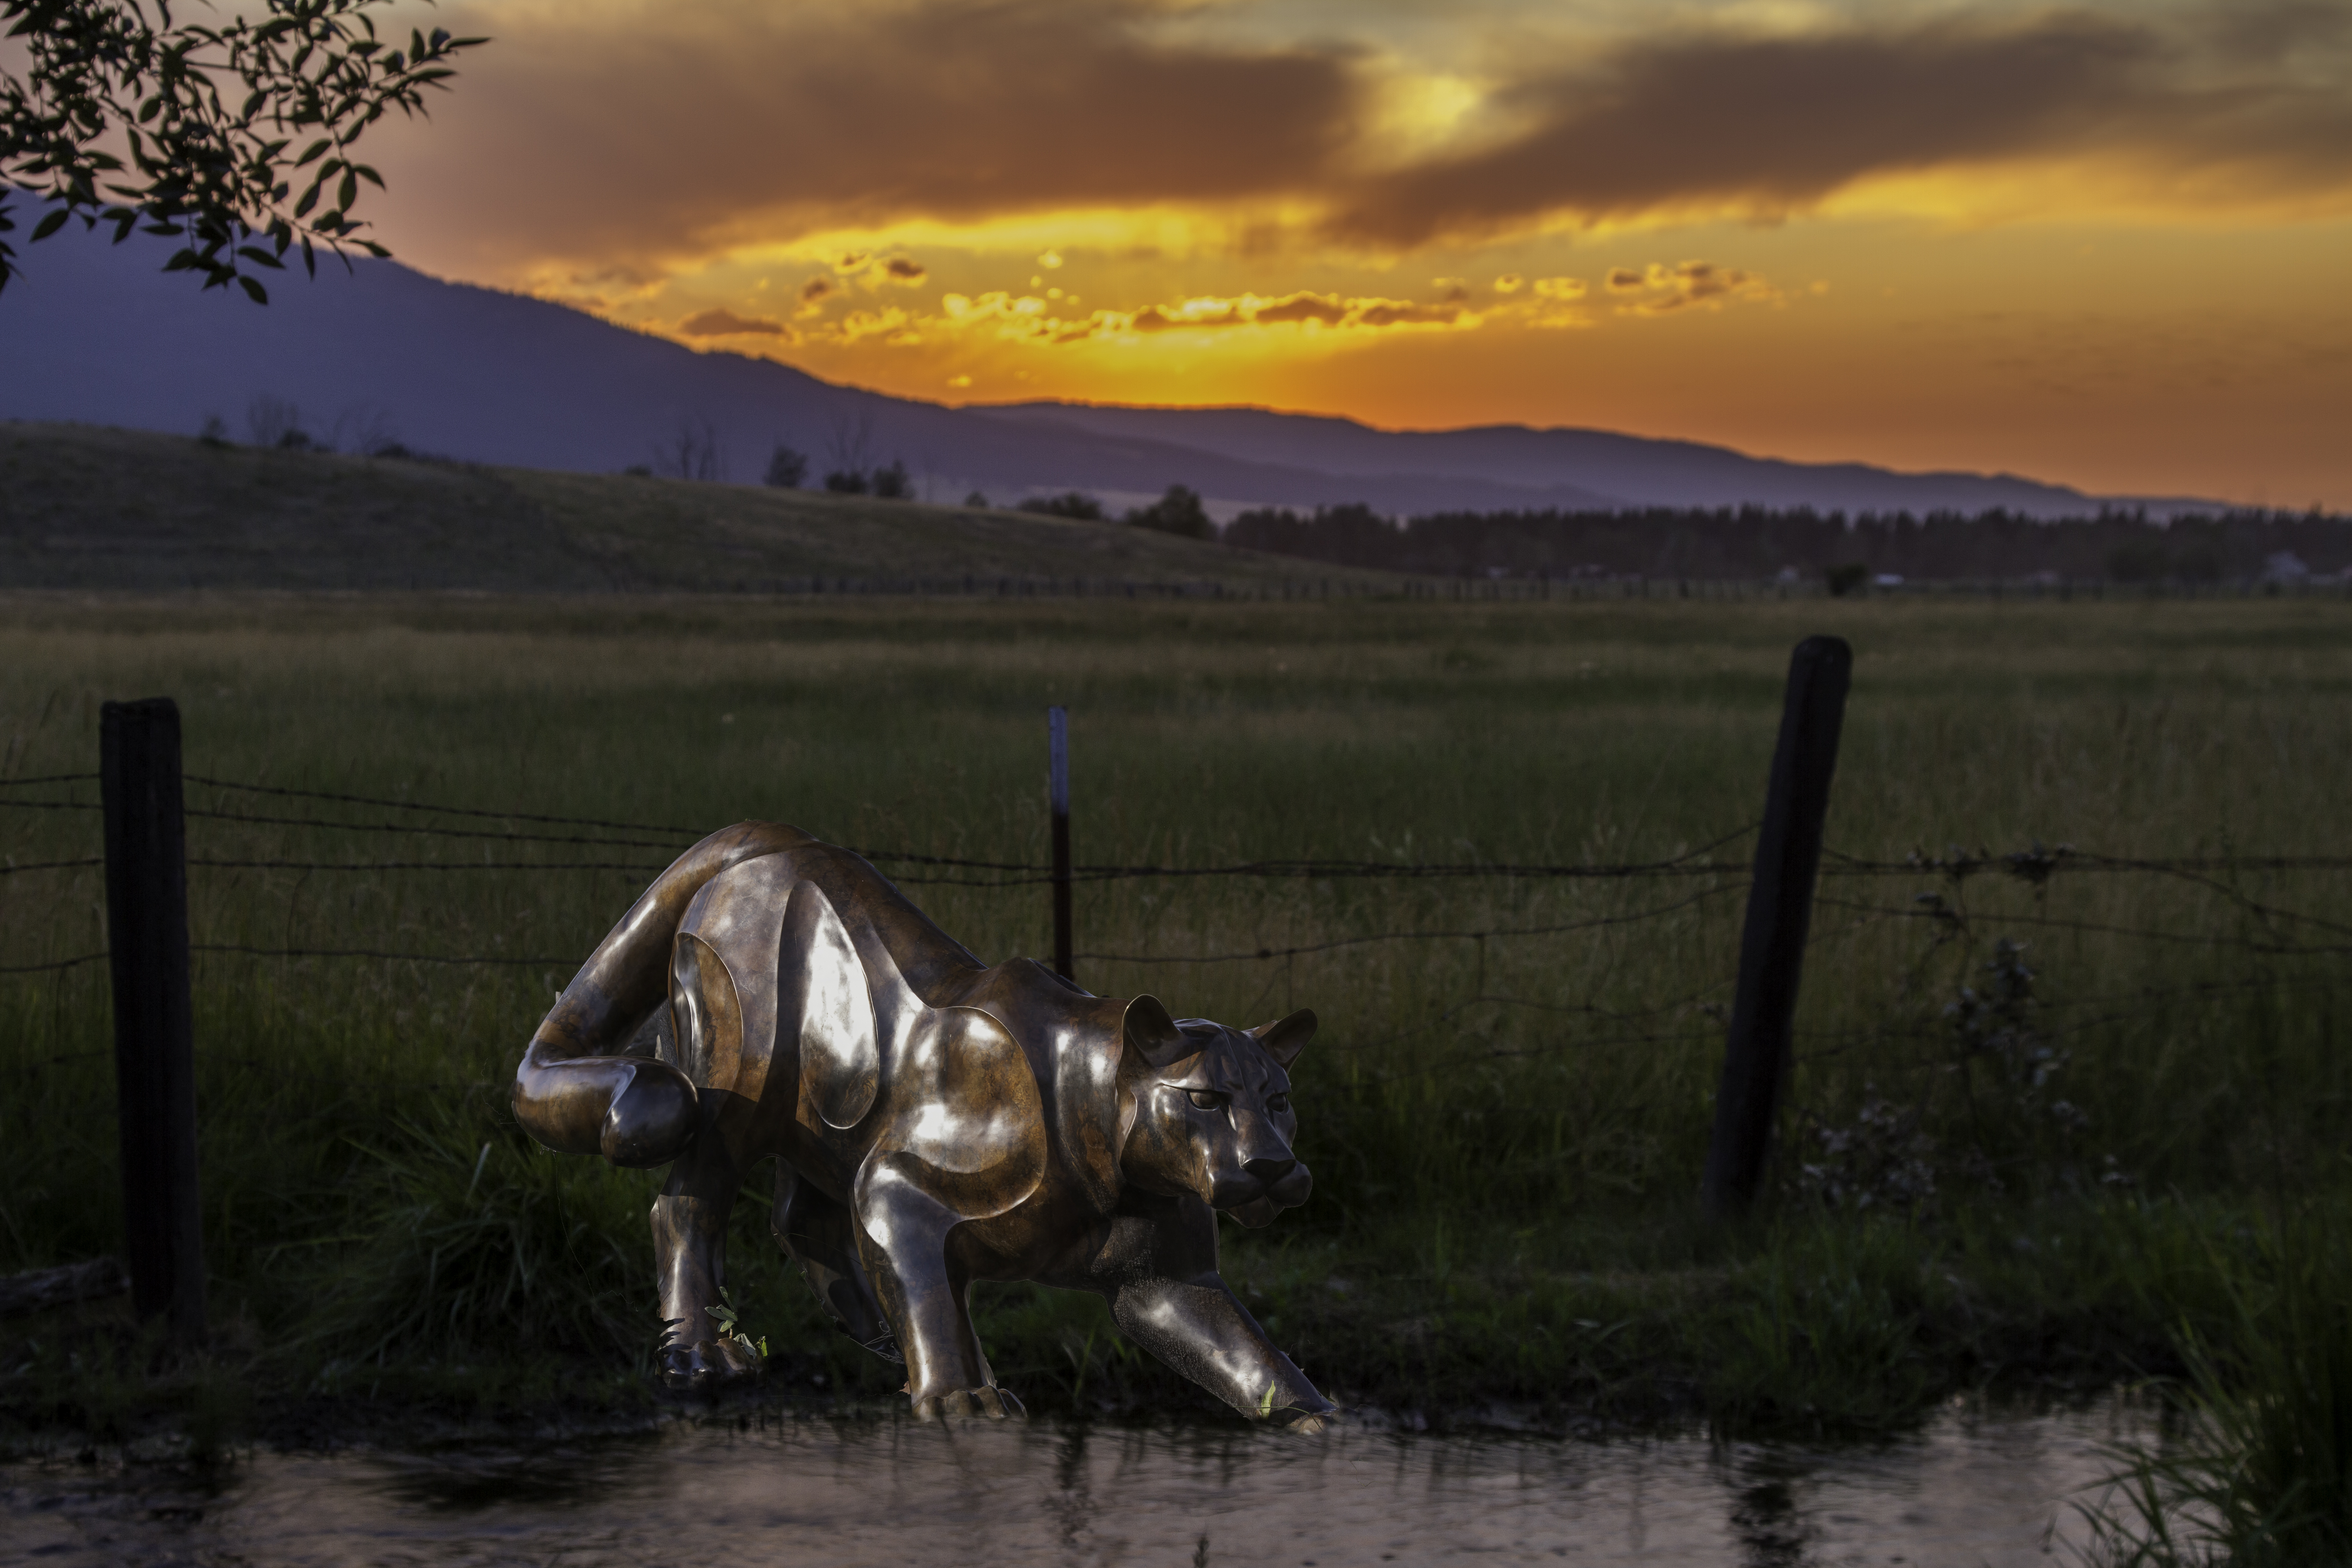 big cat sculpture with grassy field and mountain in background at sunset